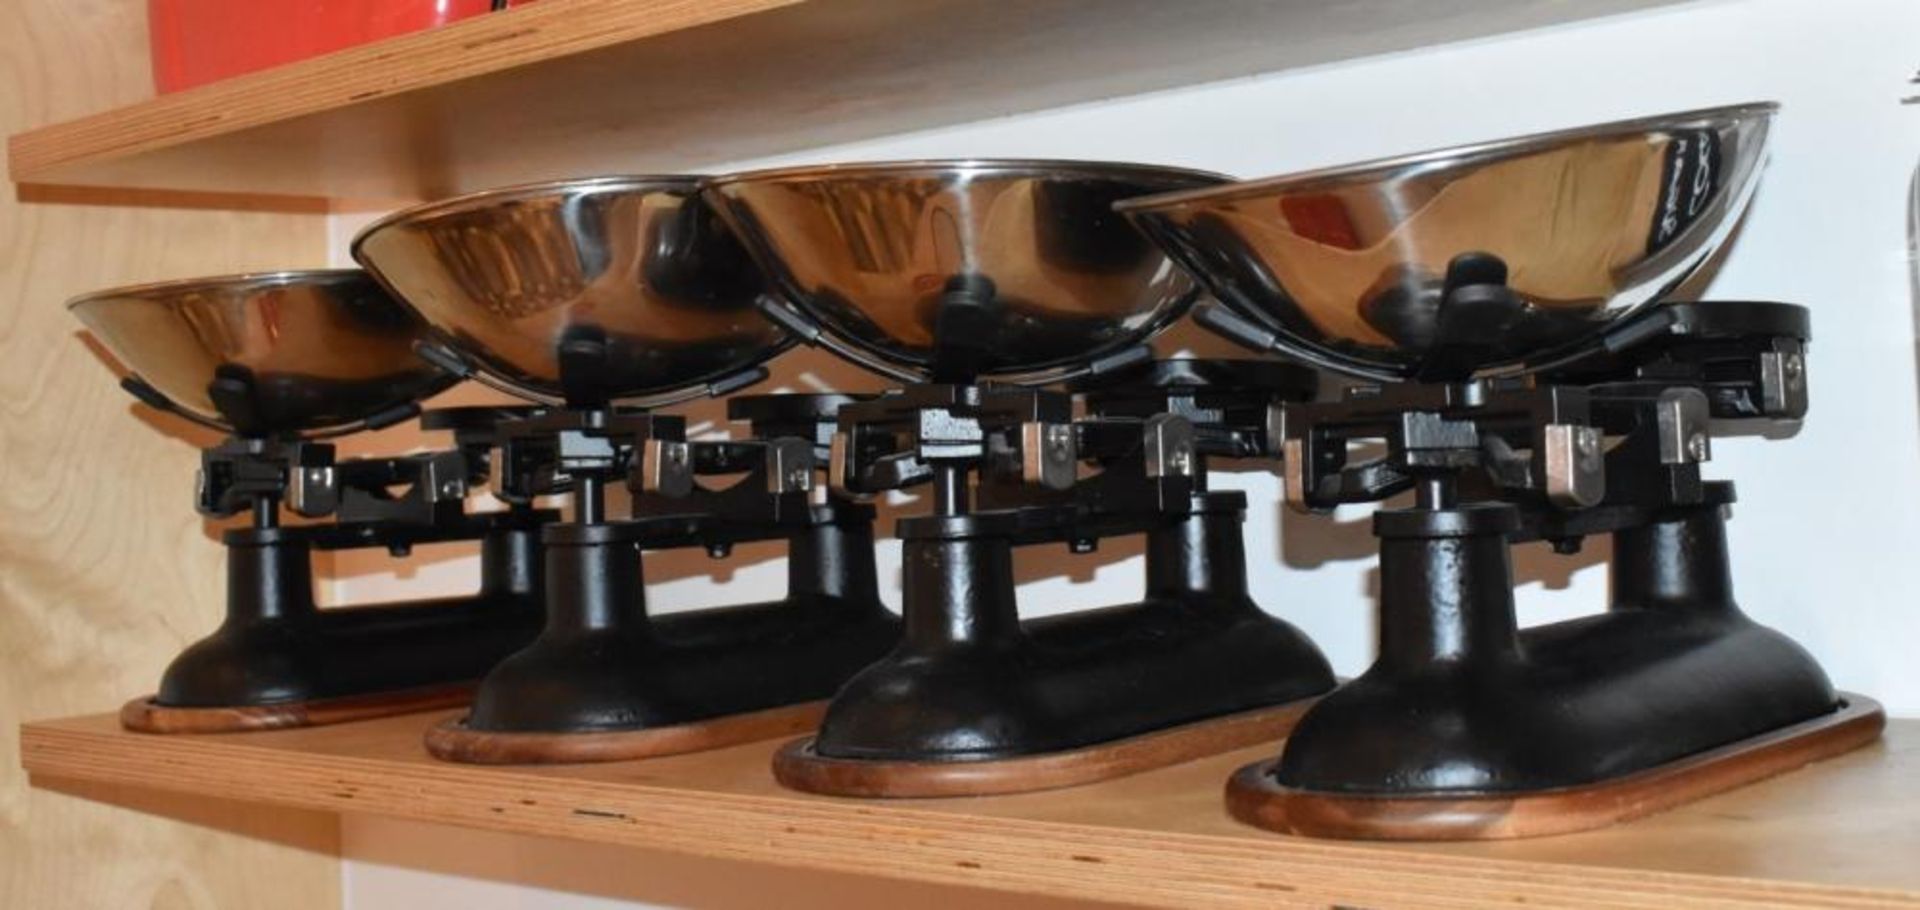 4 x Sets of Thomas Plant Cast Iron Weighing Scales With Bowls - CL489 - Location: Putney, London, SW